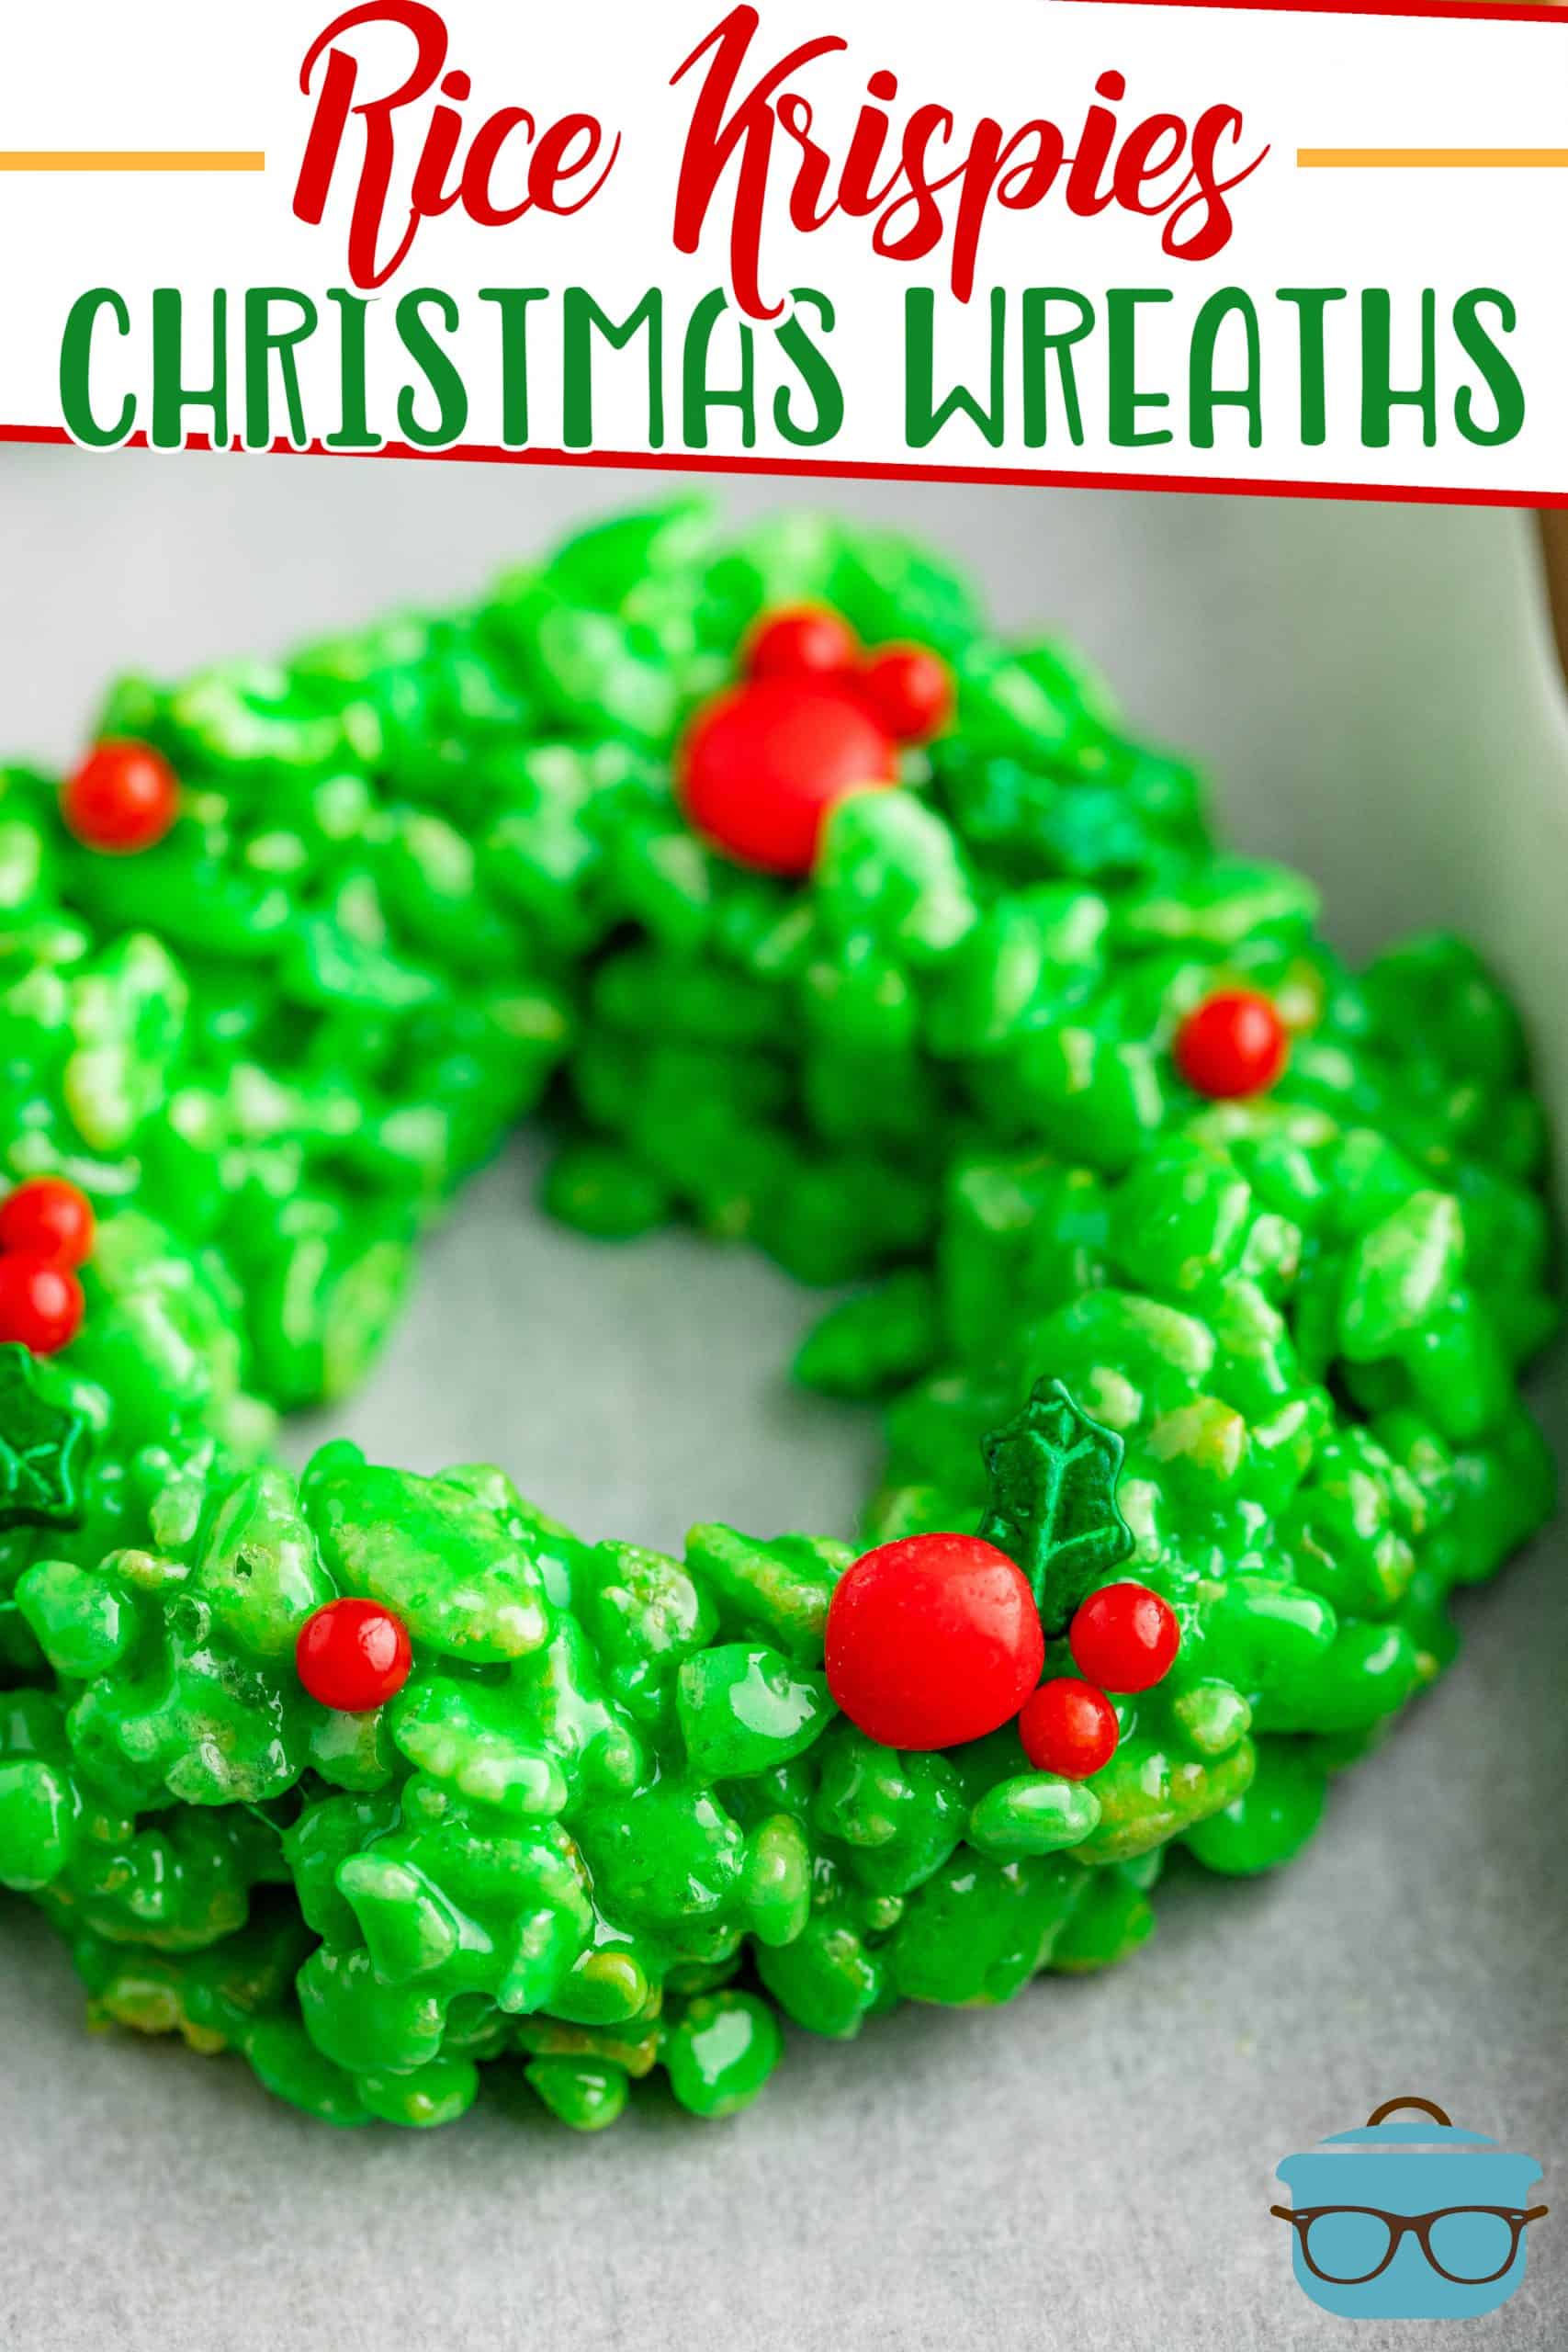 Rice Krispies Christmas Wreath recipe from The Country Cook, closeup of green Rice Krispies treats wreath that has red hot candies placed on top.